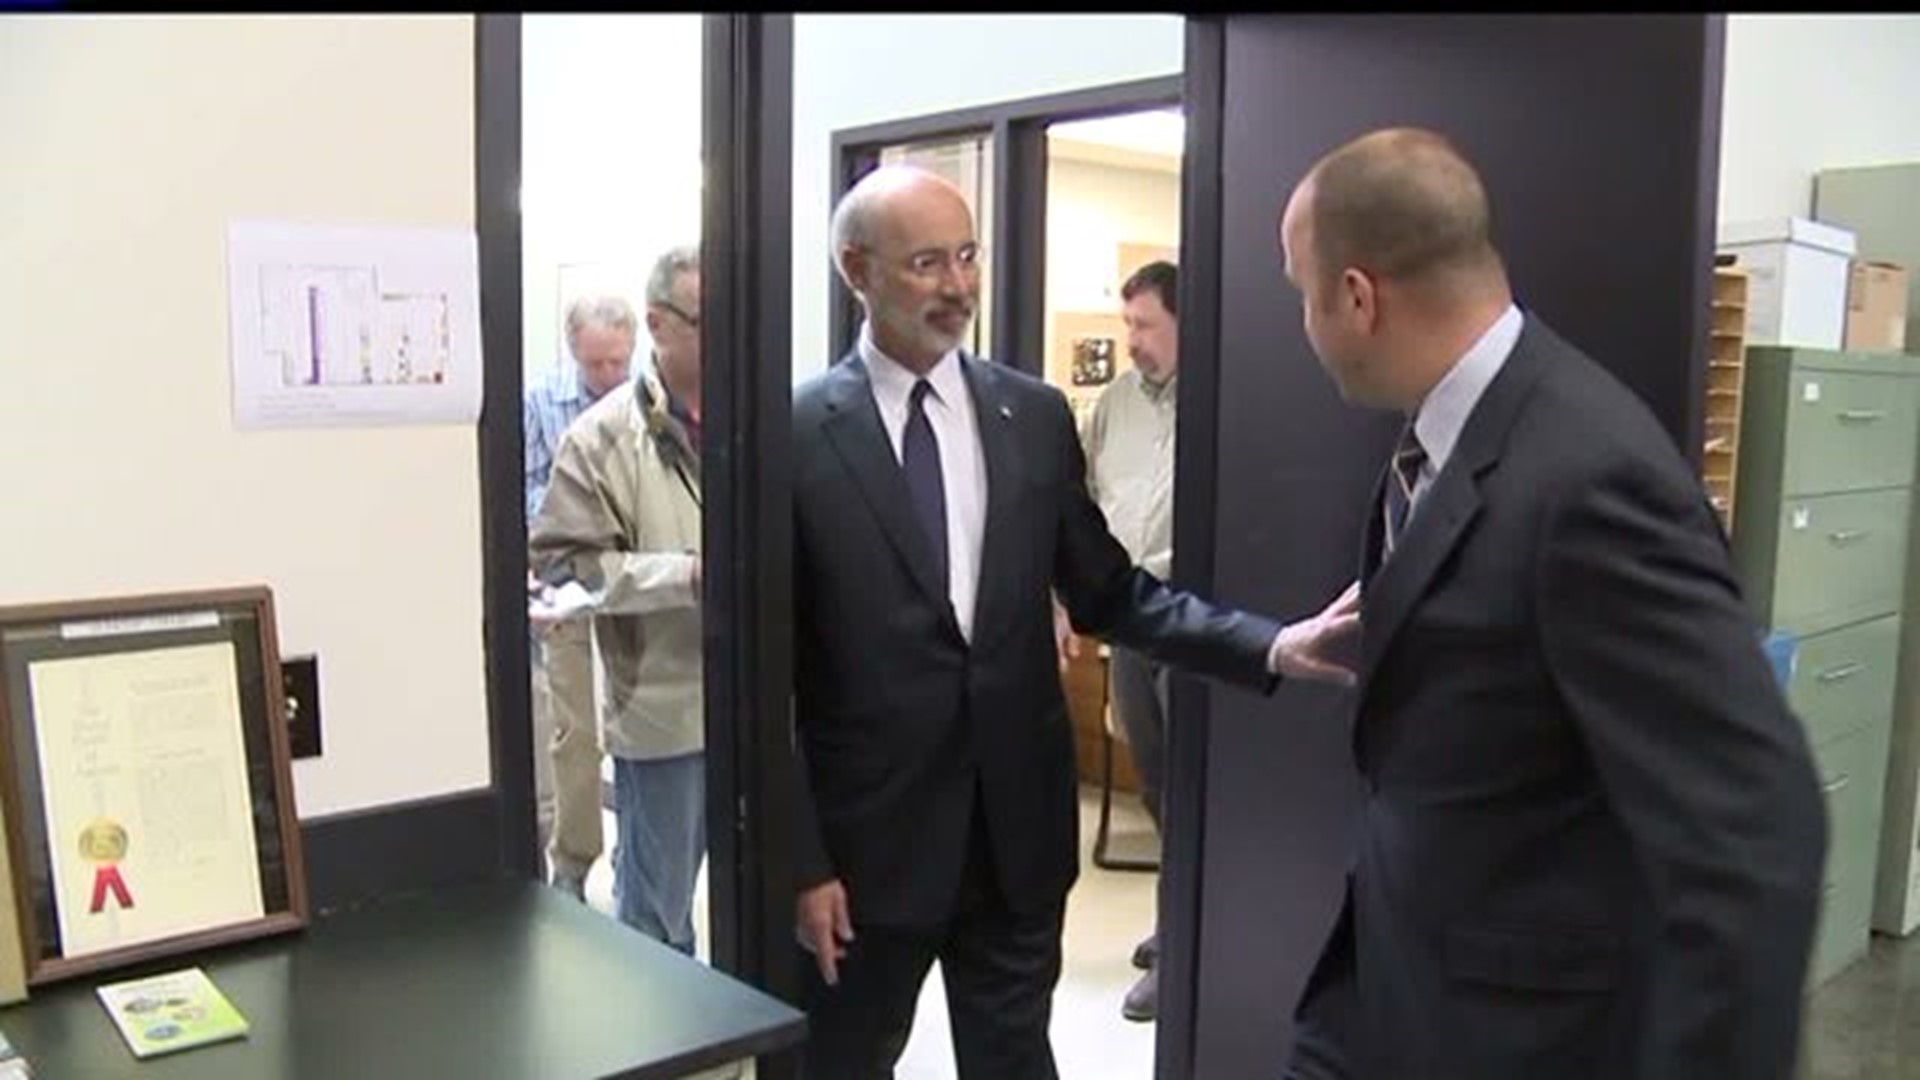 Gov. Wolf continues tour with "Jobs that Pay"